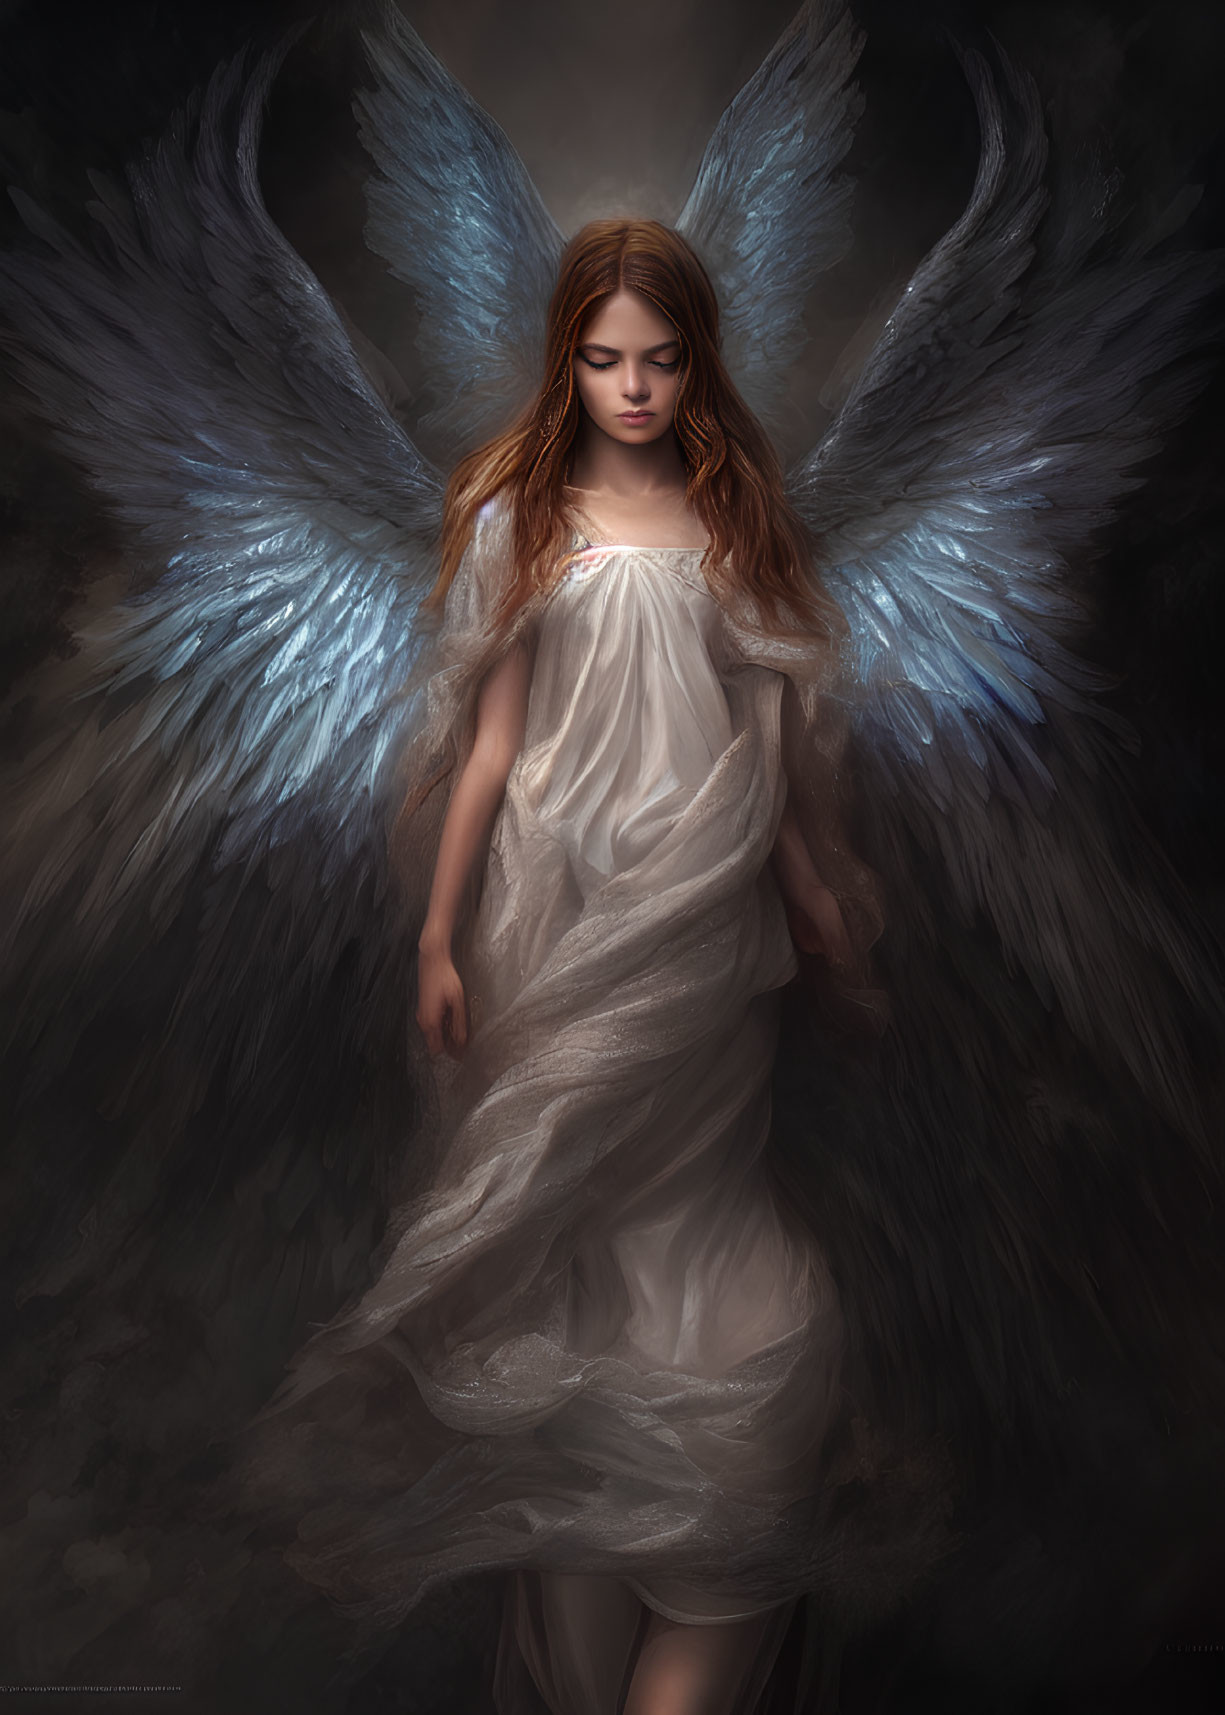 Digital art: Ethereal woman with blue wings in white dress on dark background